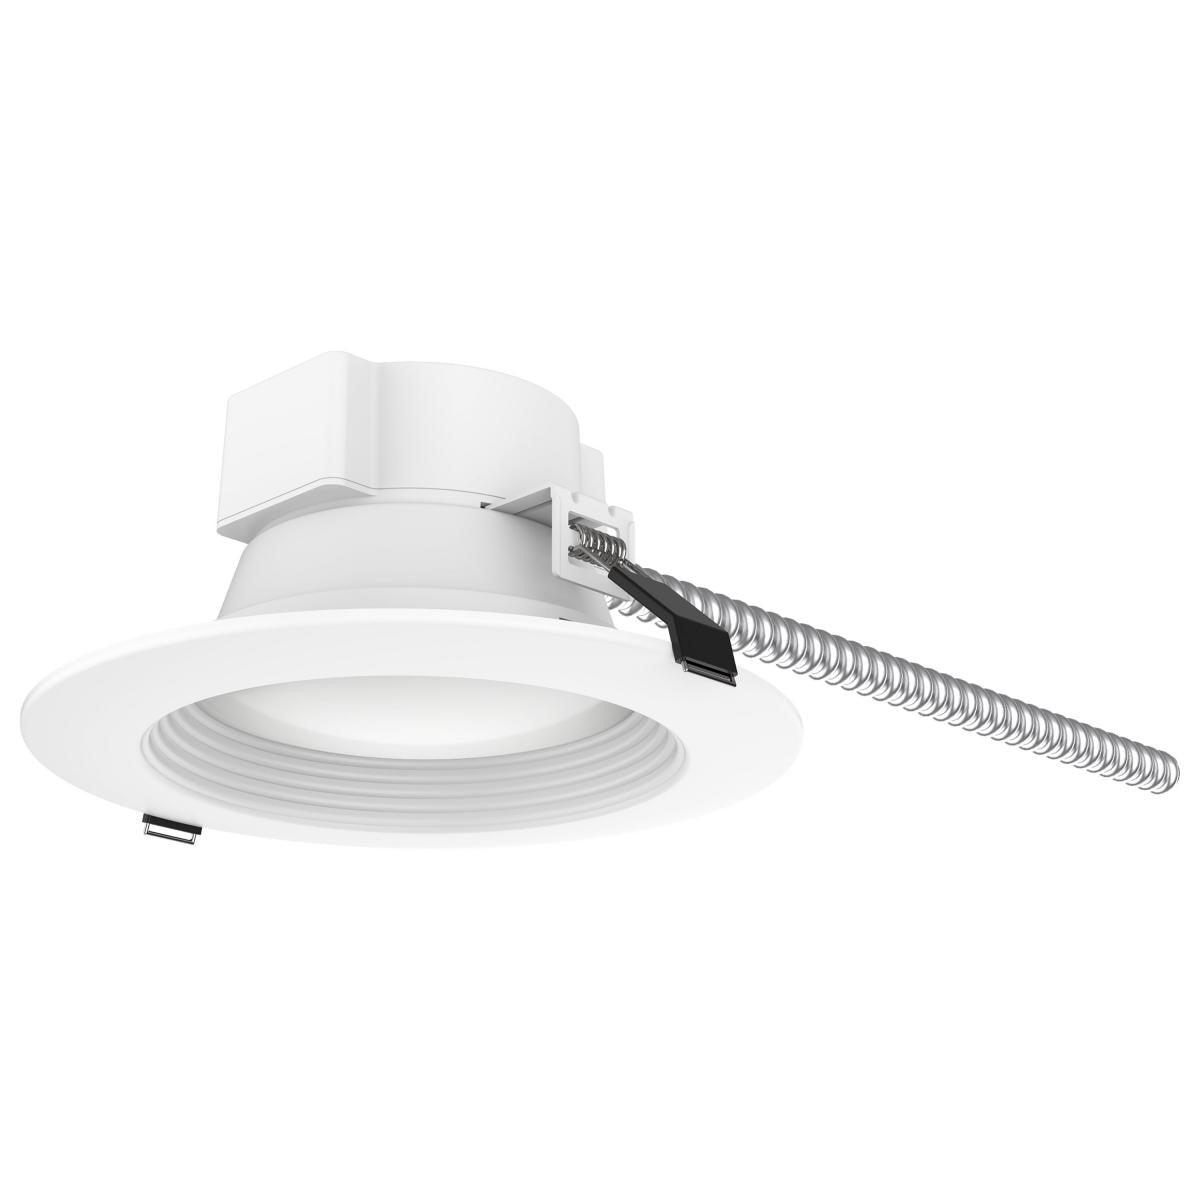 6 Inch Commercial LED Downlight, Round, 15 Watt, 1600 Lumens, Selectable CCT, 2700K to 5000K, Baffle Trim - Bees Lighting